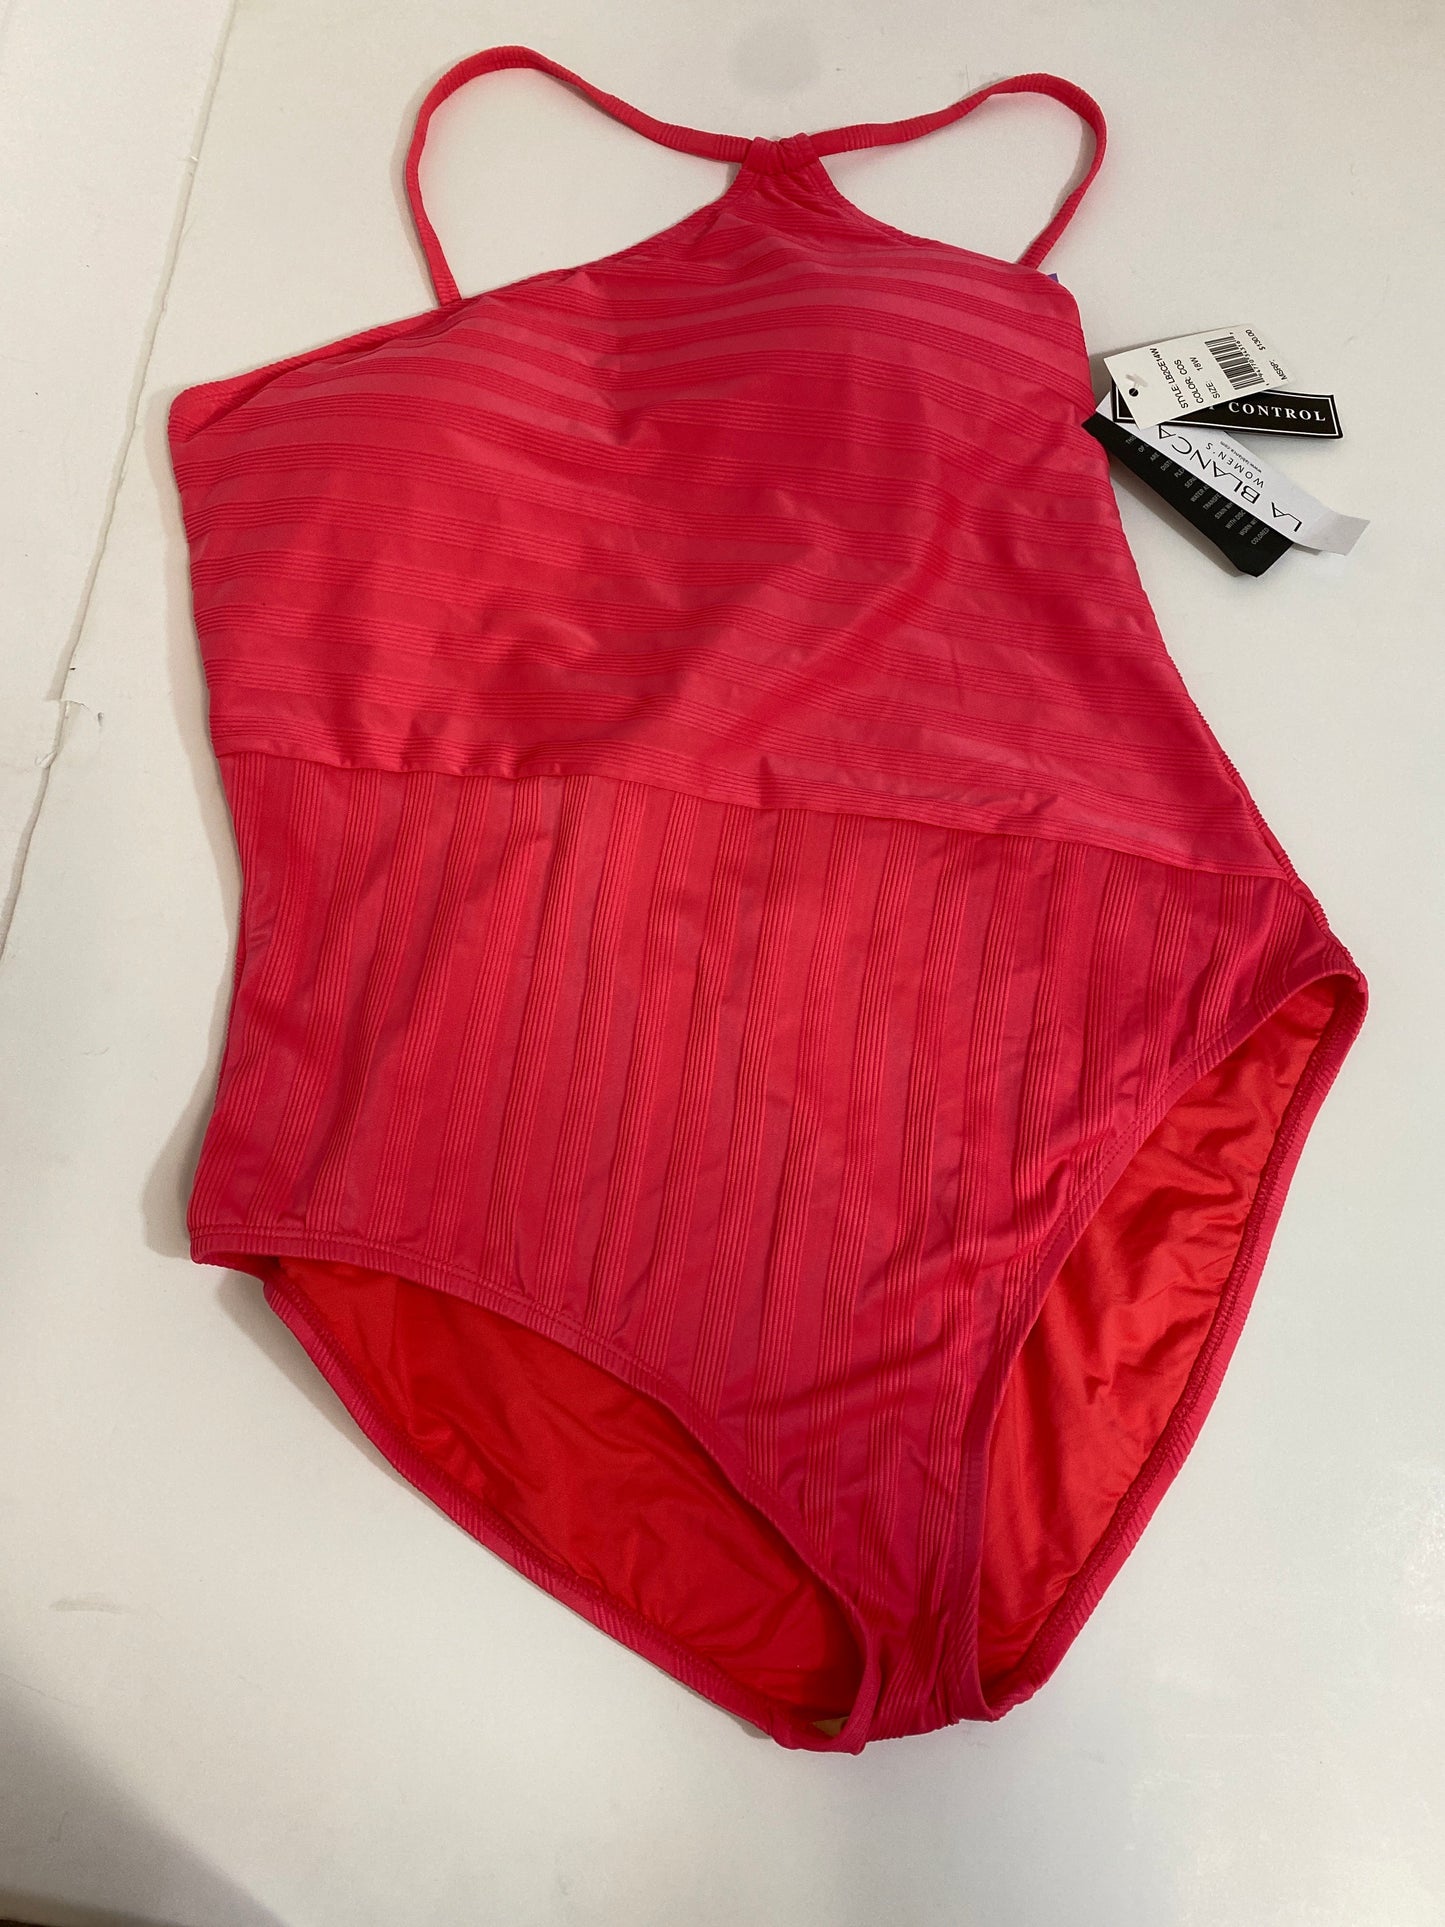 Coral Swimsuit Clothes Mentor, Size 1x